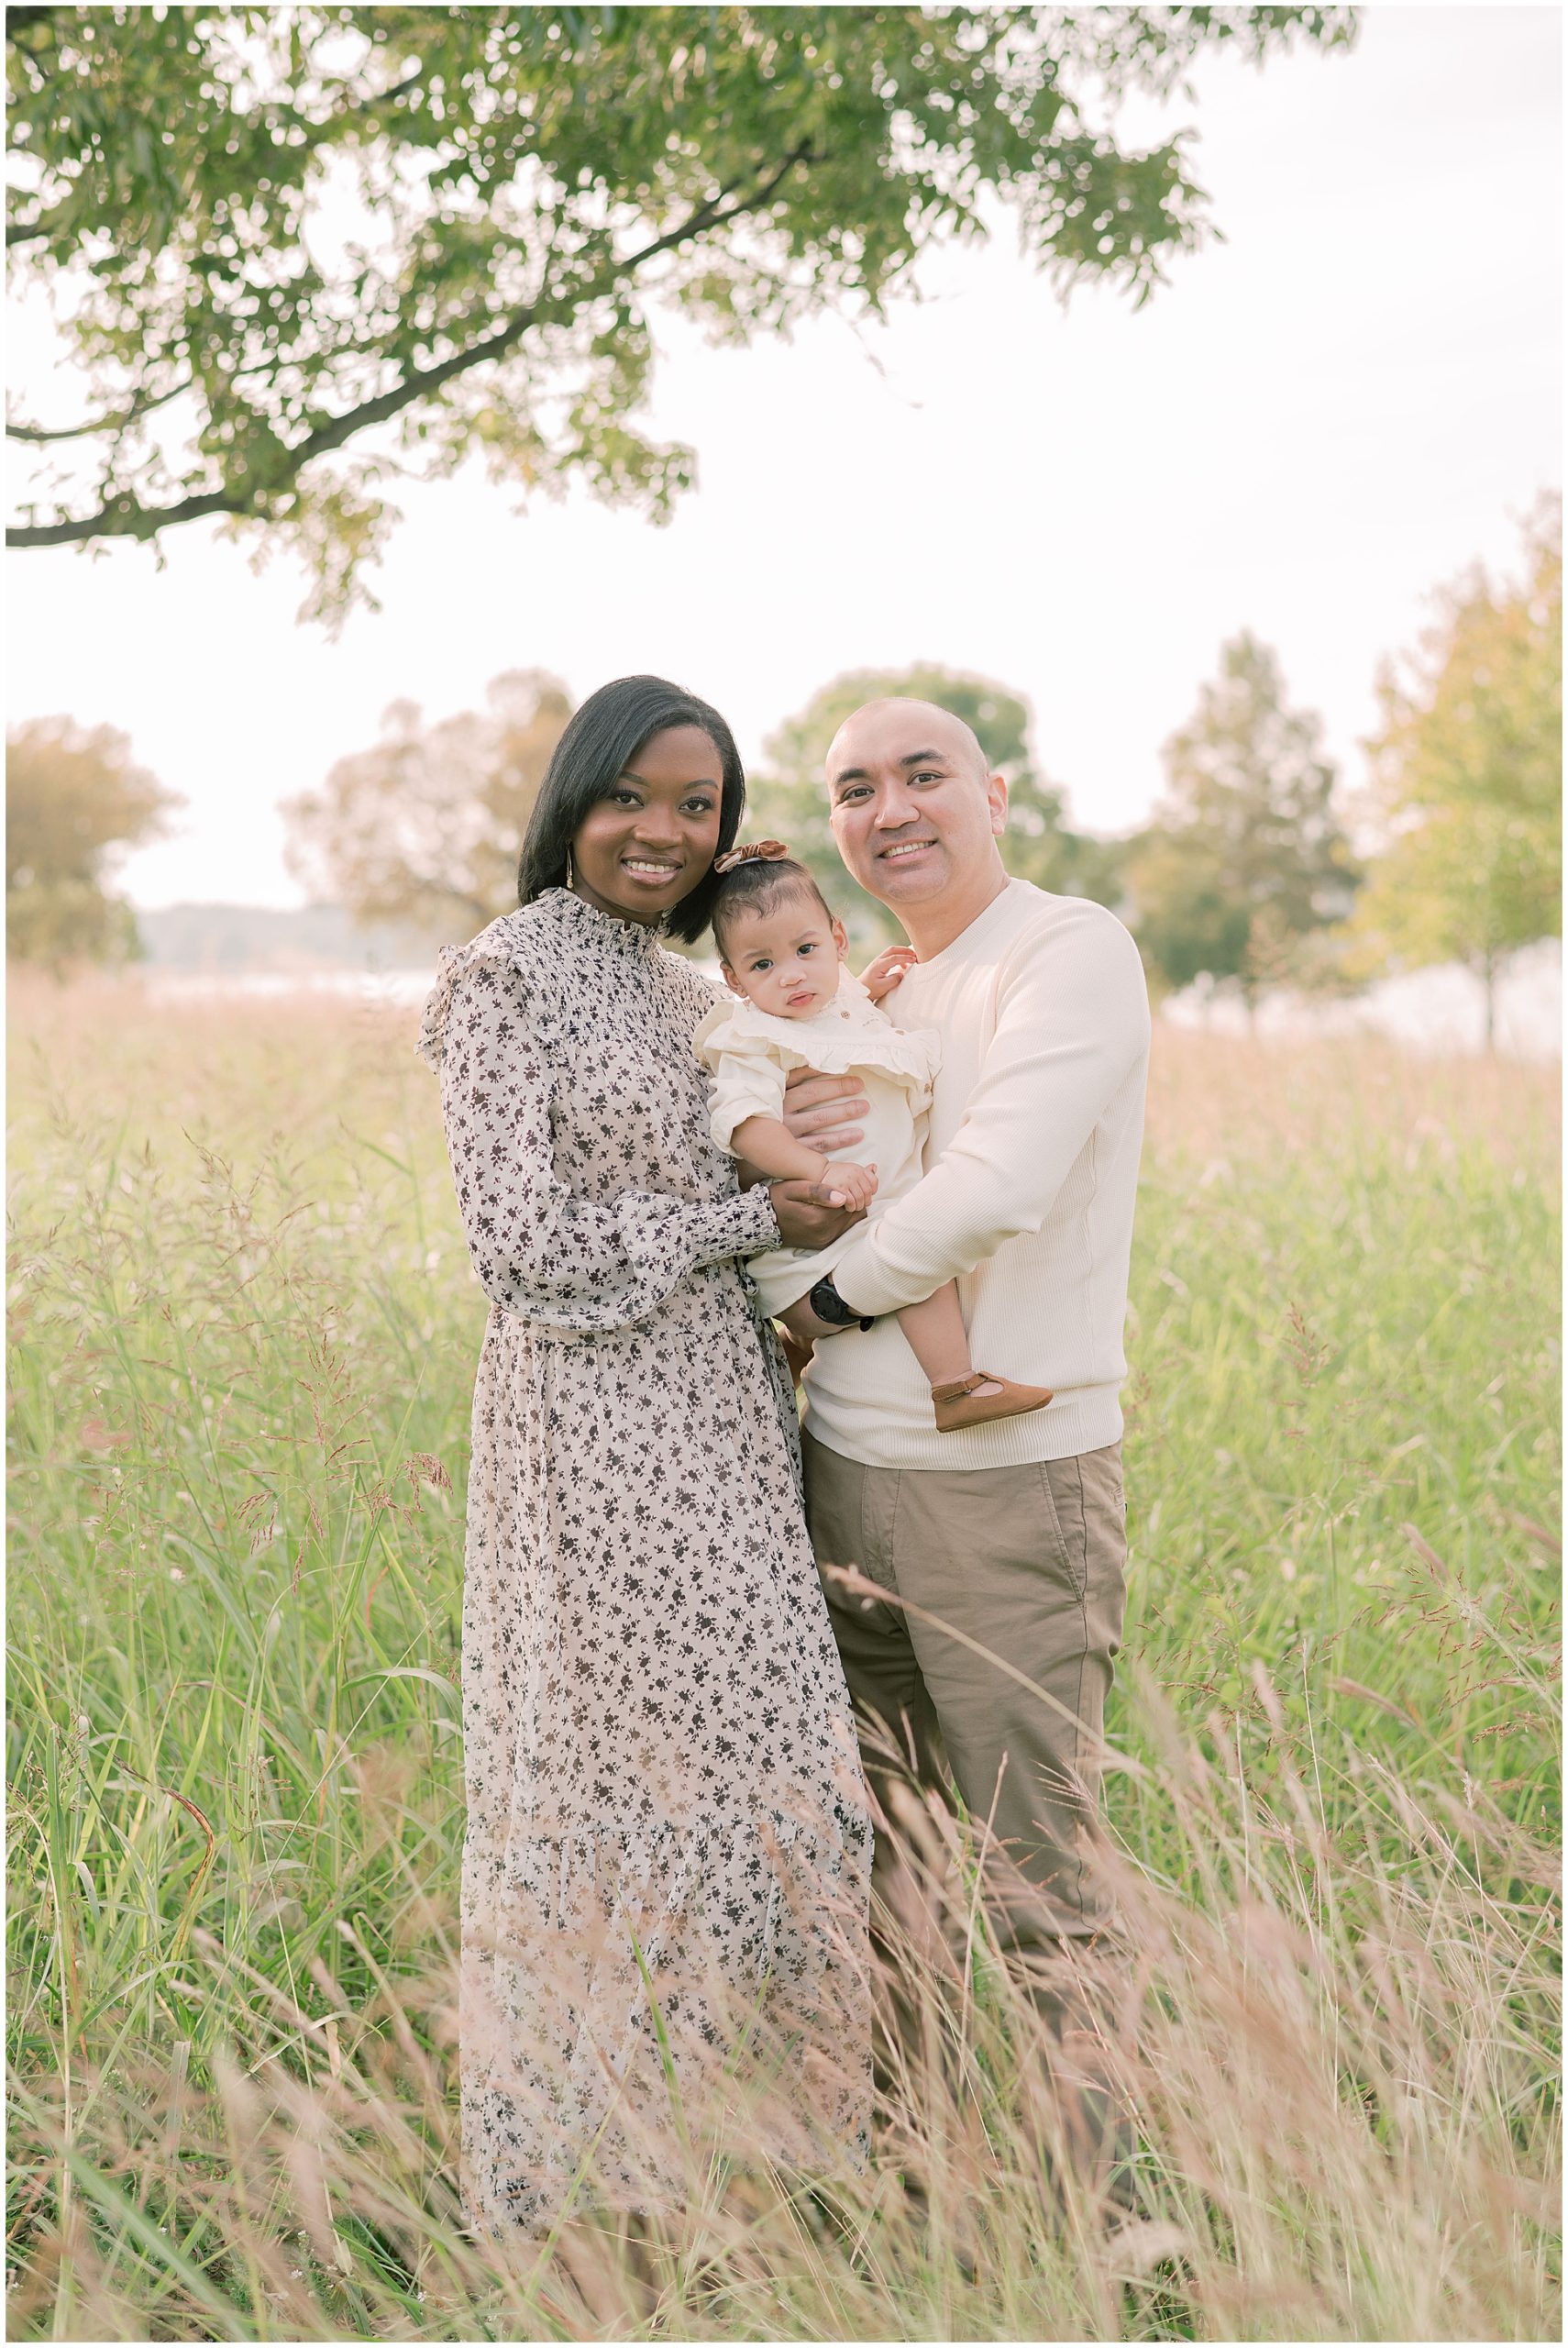 Family enjoying a picturesque session at White Rock Lake in Dallas, Texas surrounded by lush greenery and serene setting 